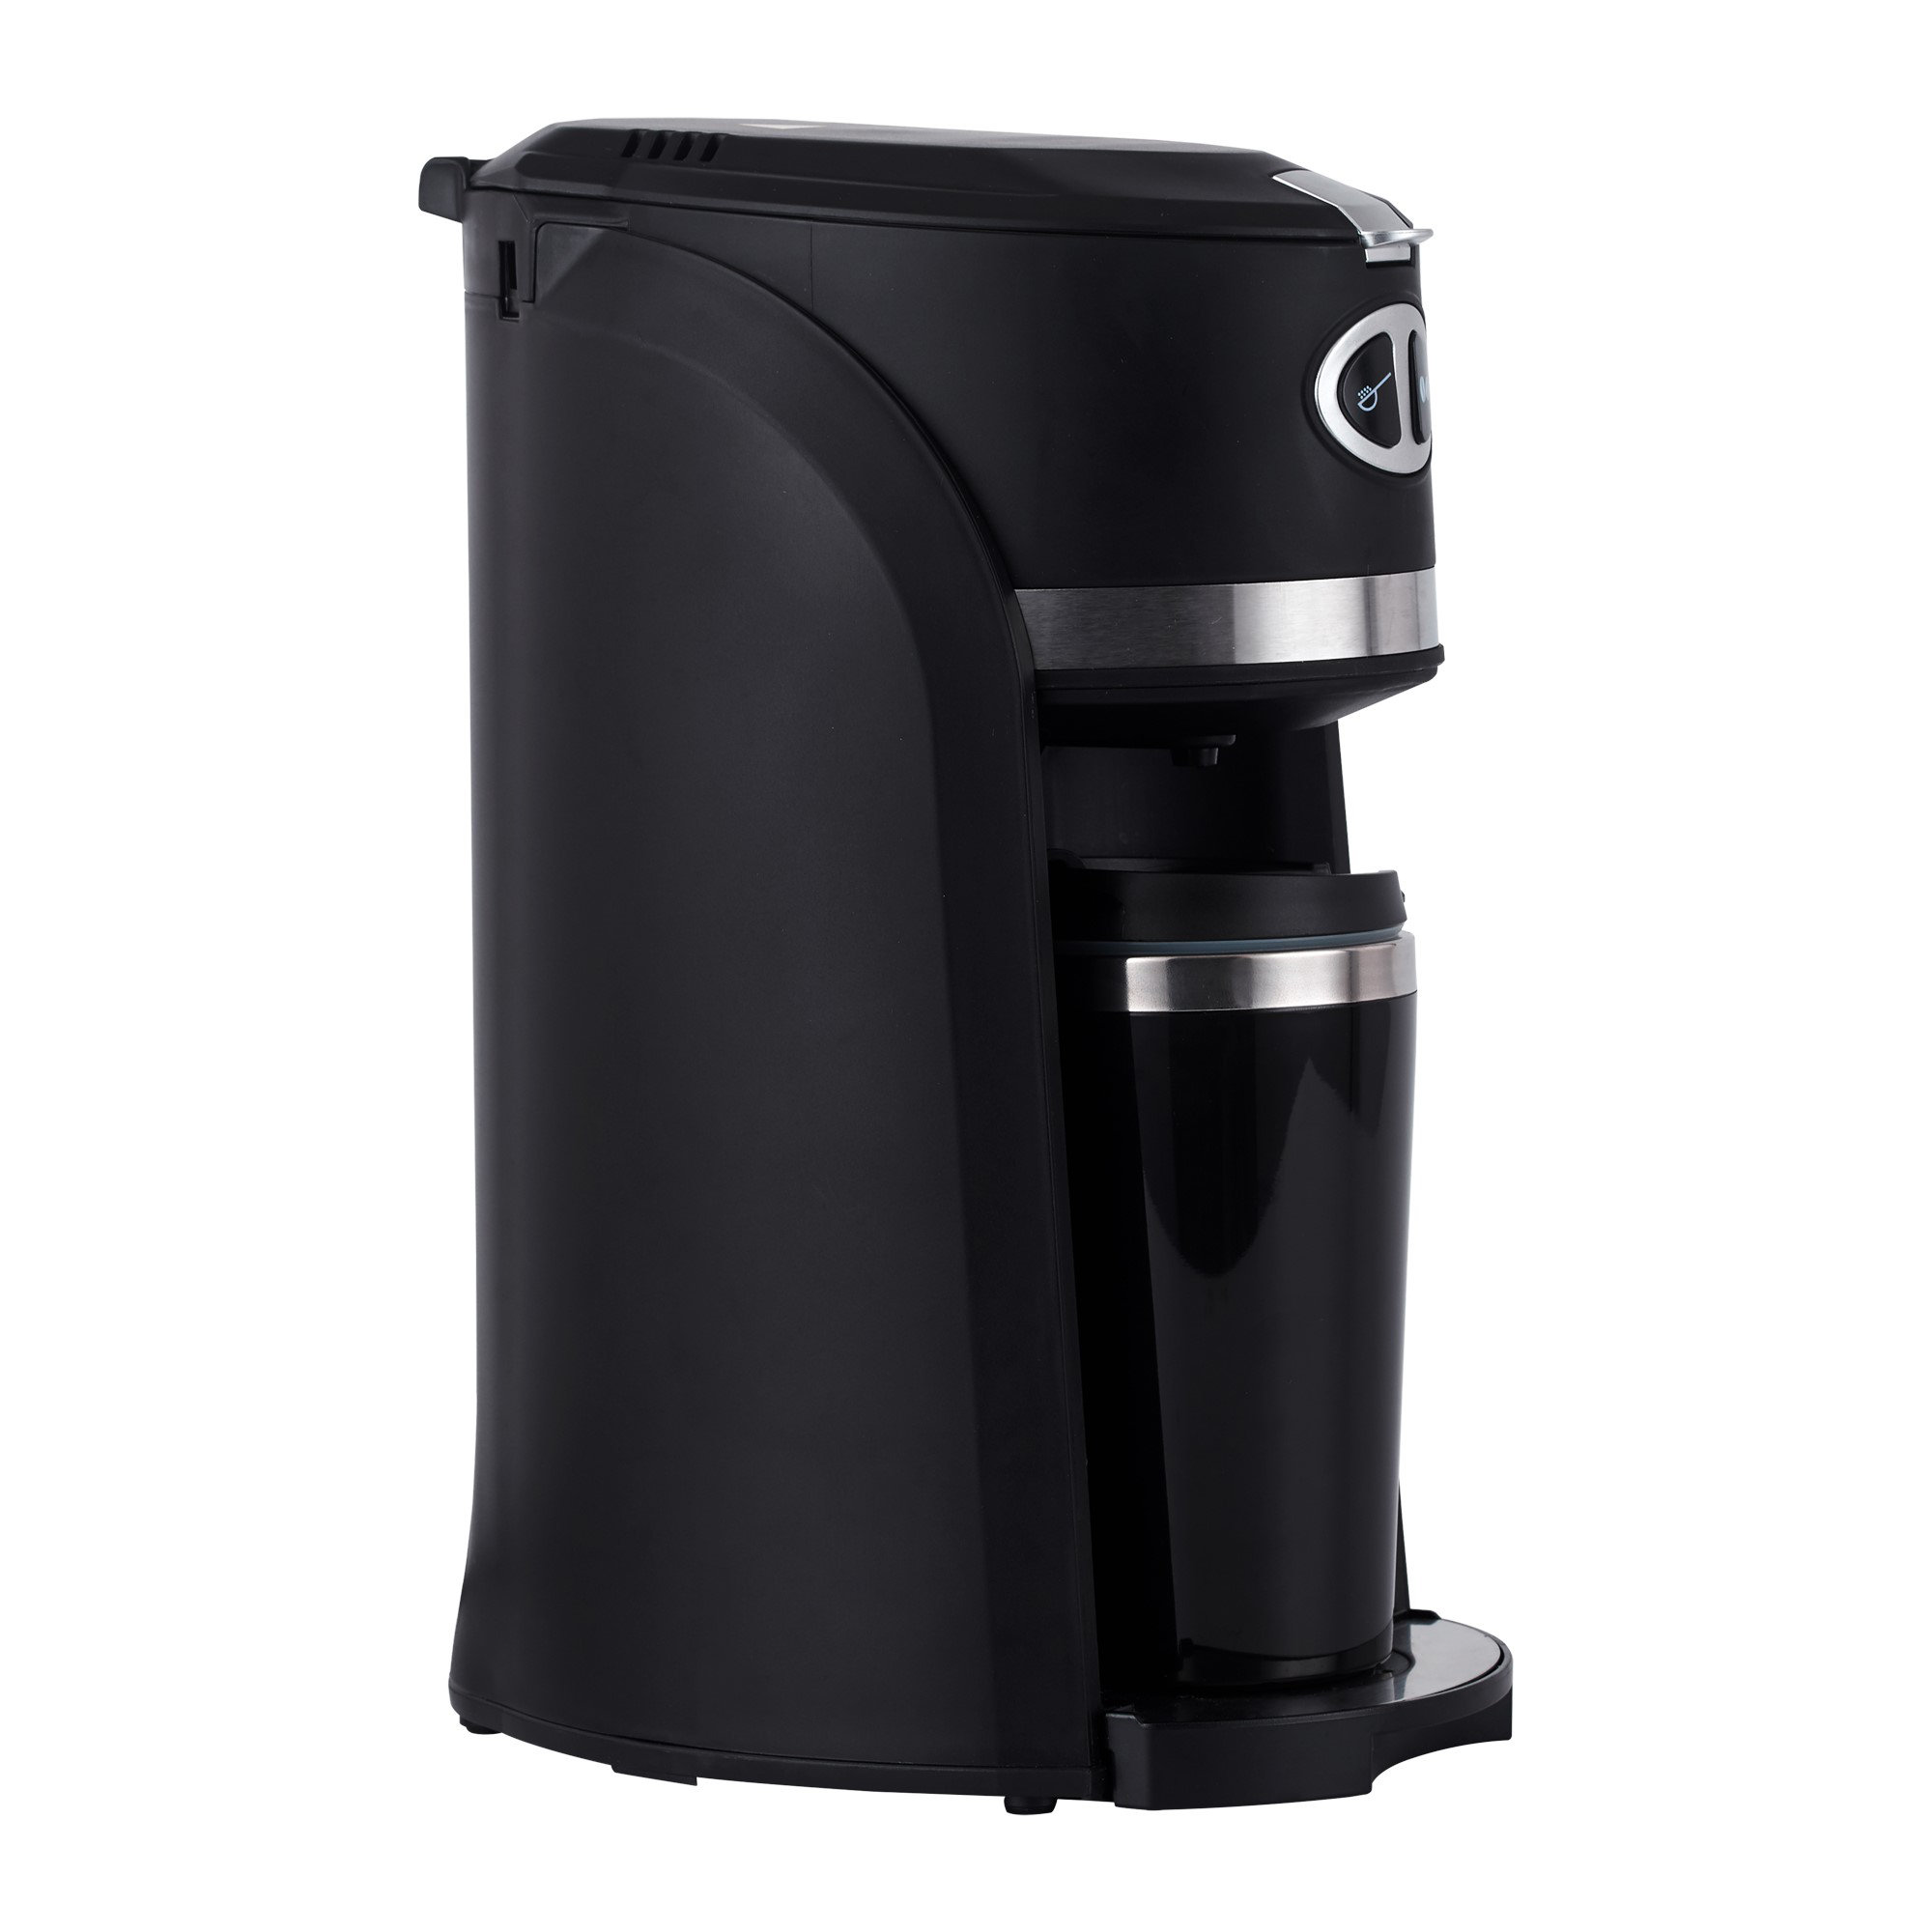 Premium 2-in-1 Grind and Brew 3-cup On-the-go Coffee Maker with Travel Mug